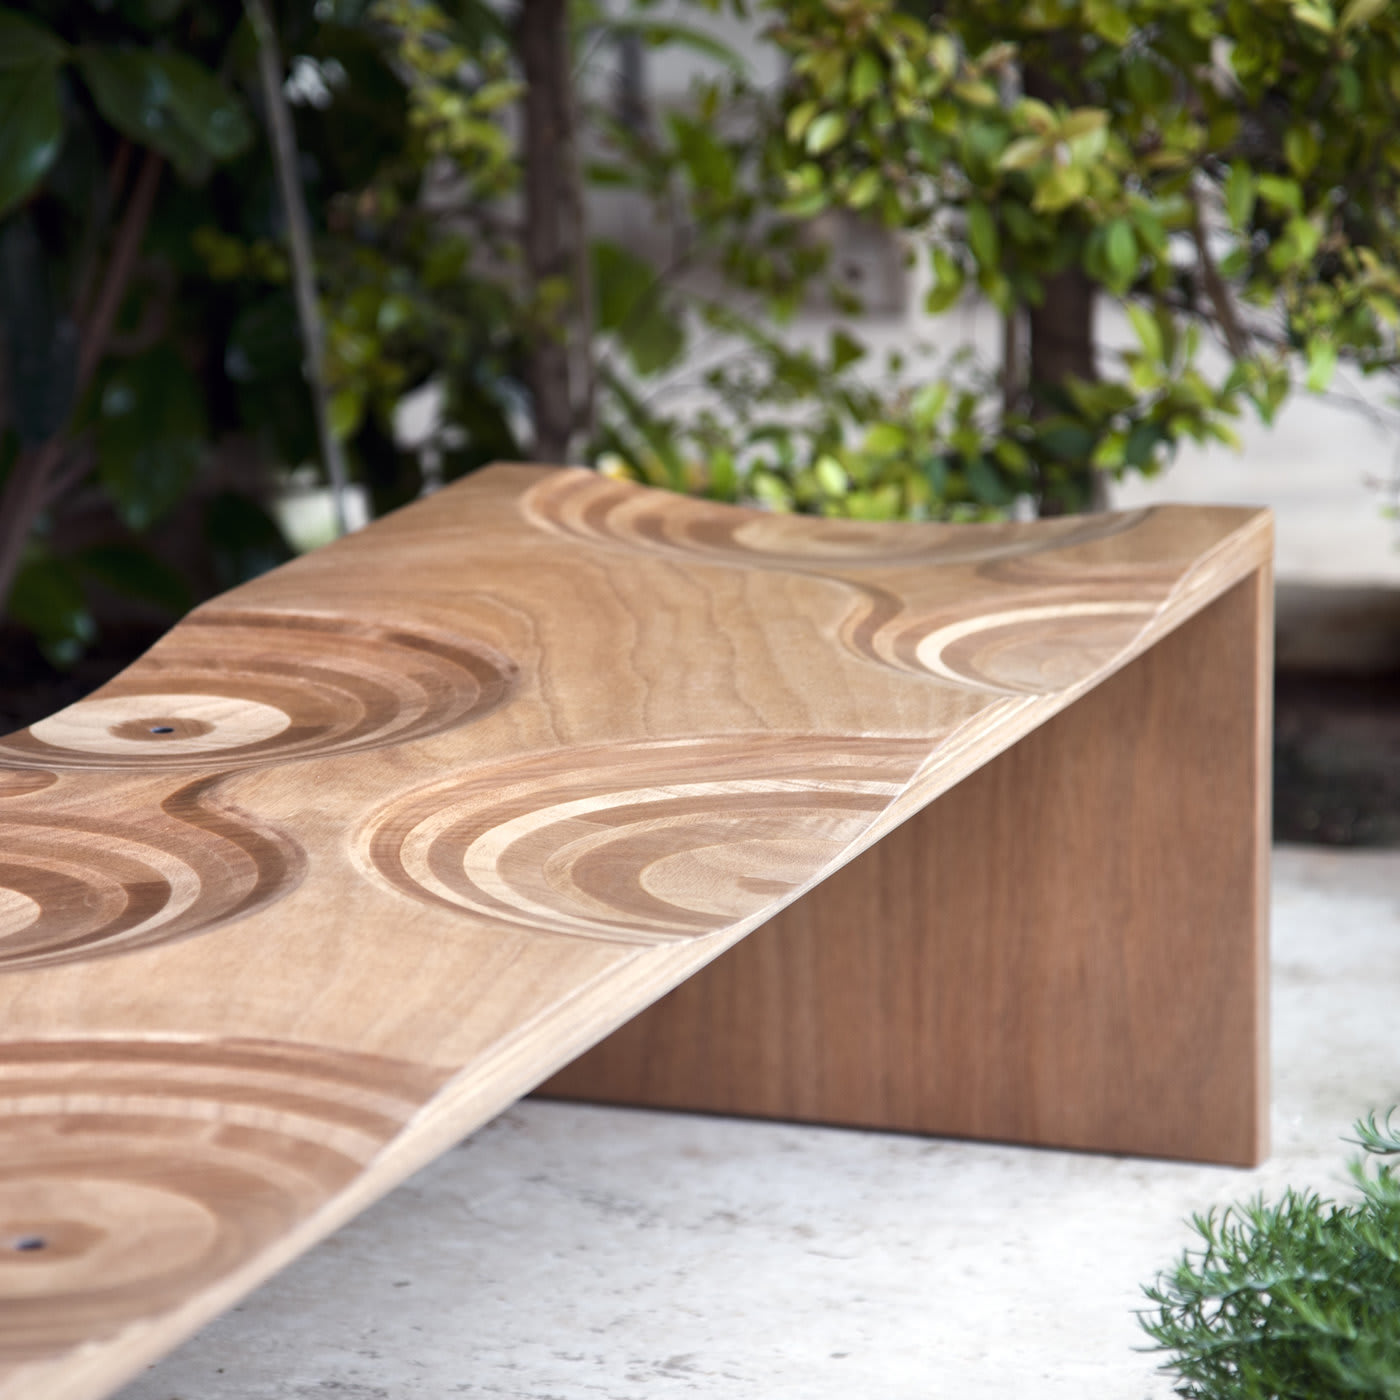 Ripples Outdoor Bench by Toyo Ito - Horm